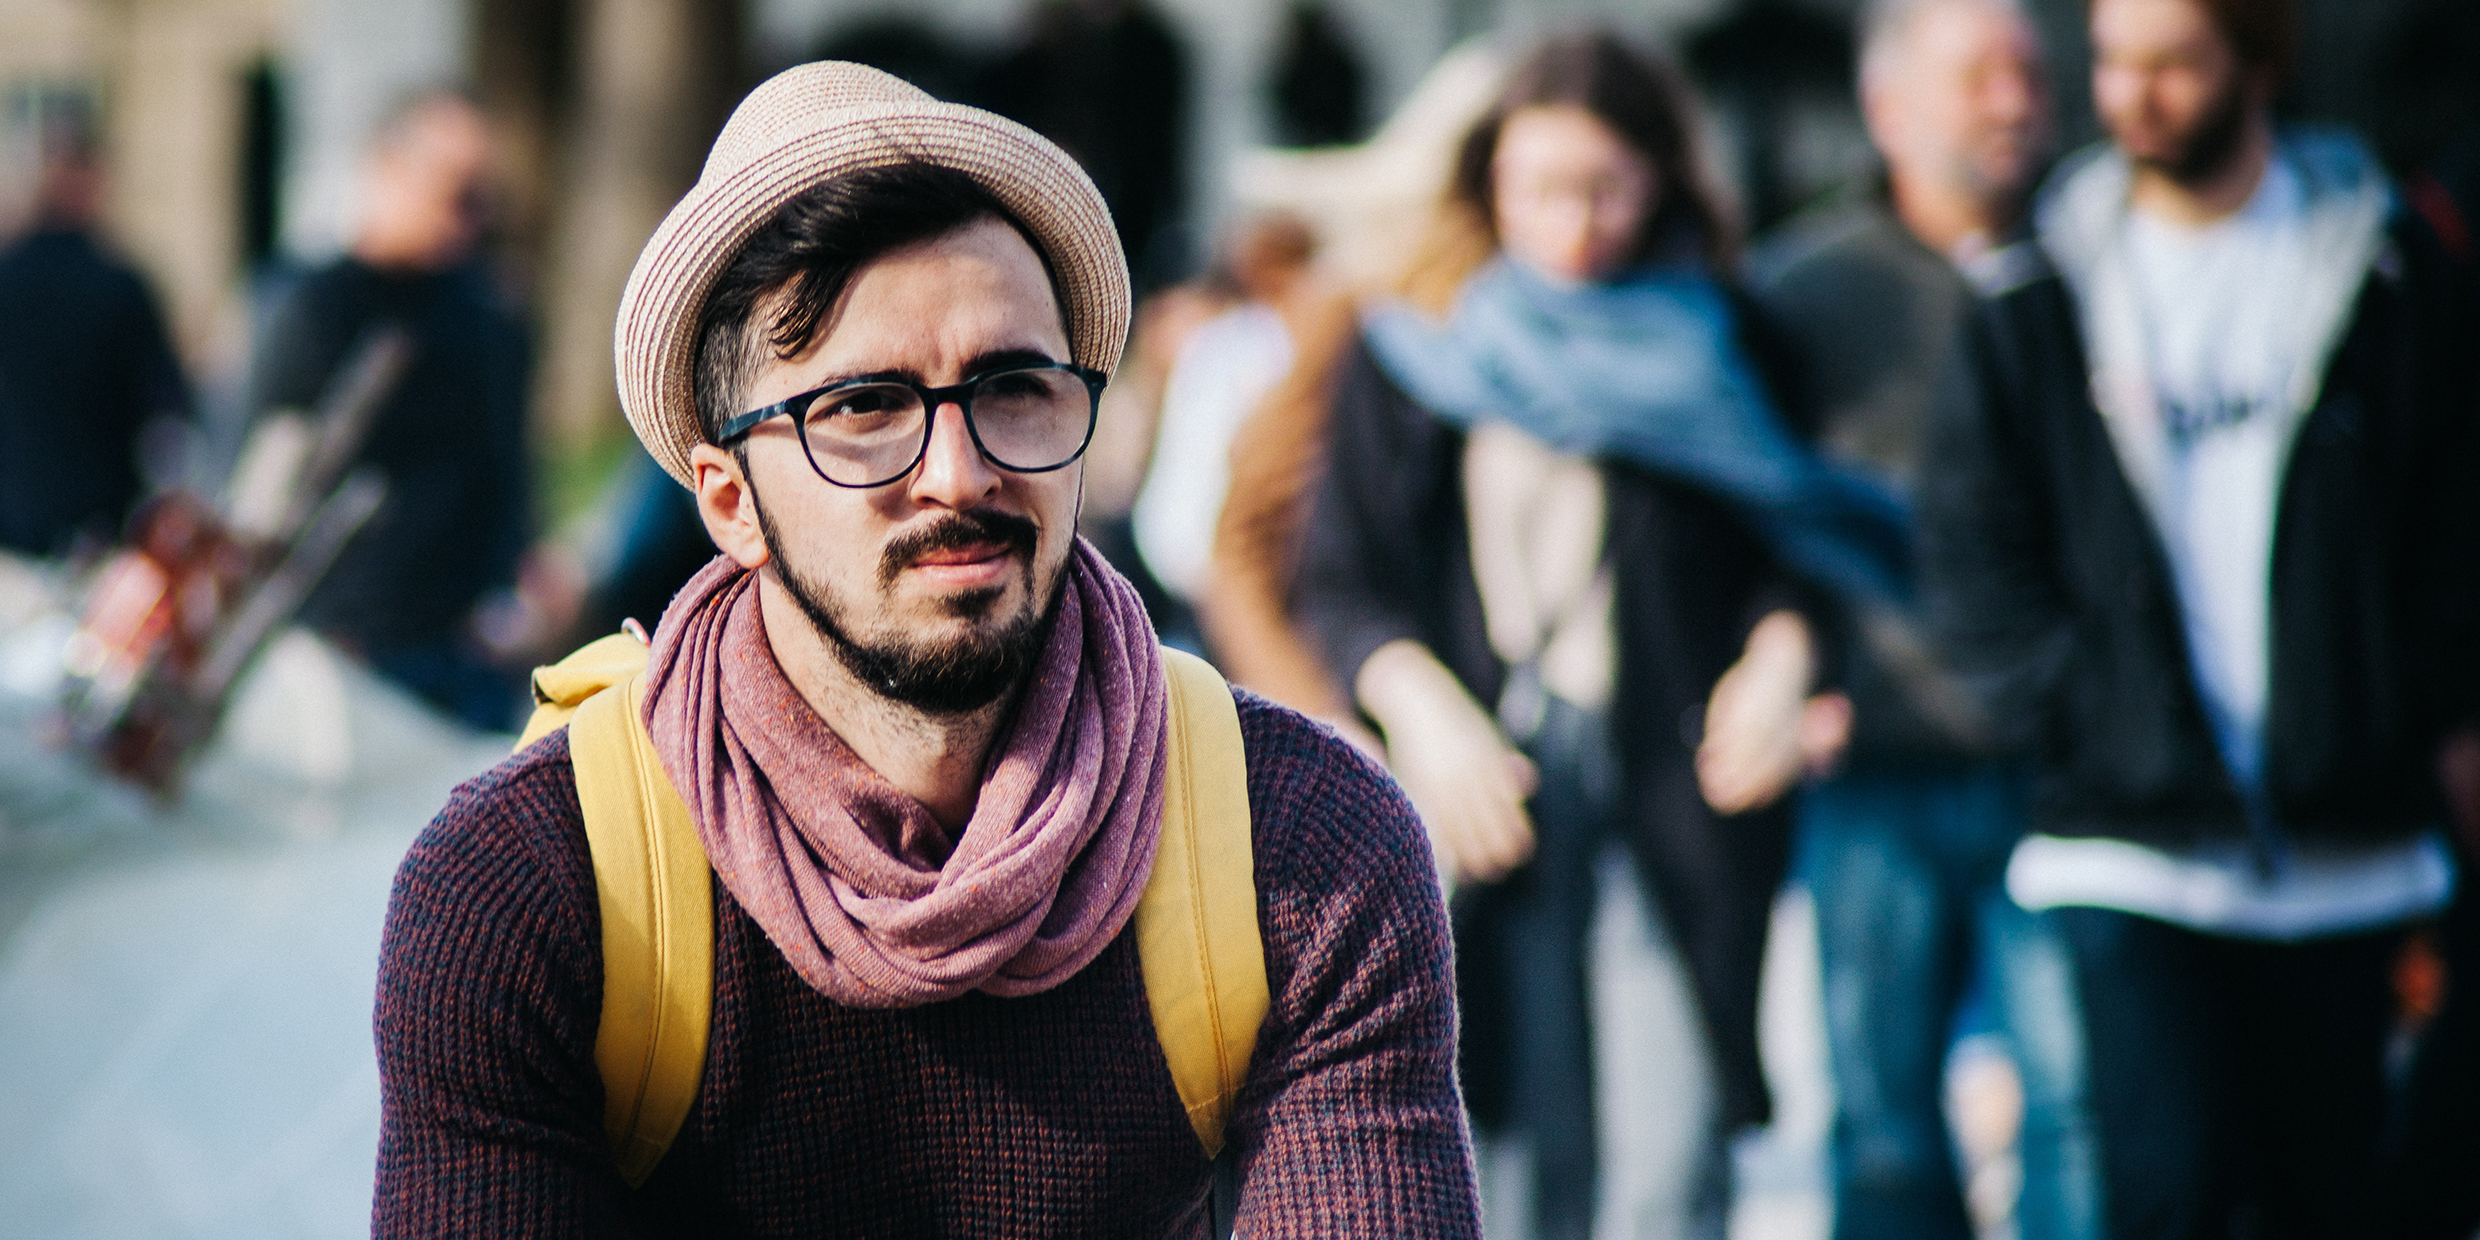 A man with stylish hat, scarf, and glasses looking thoughtful